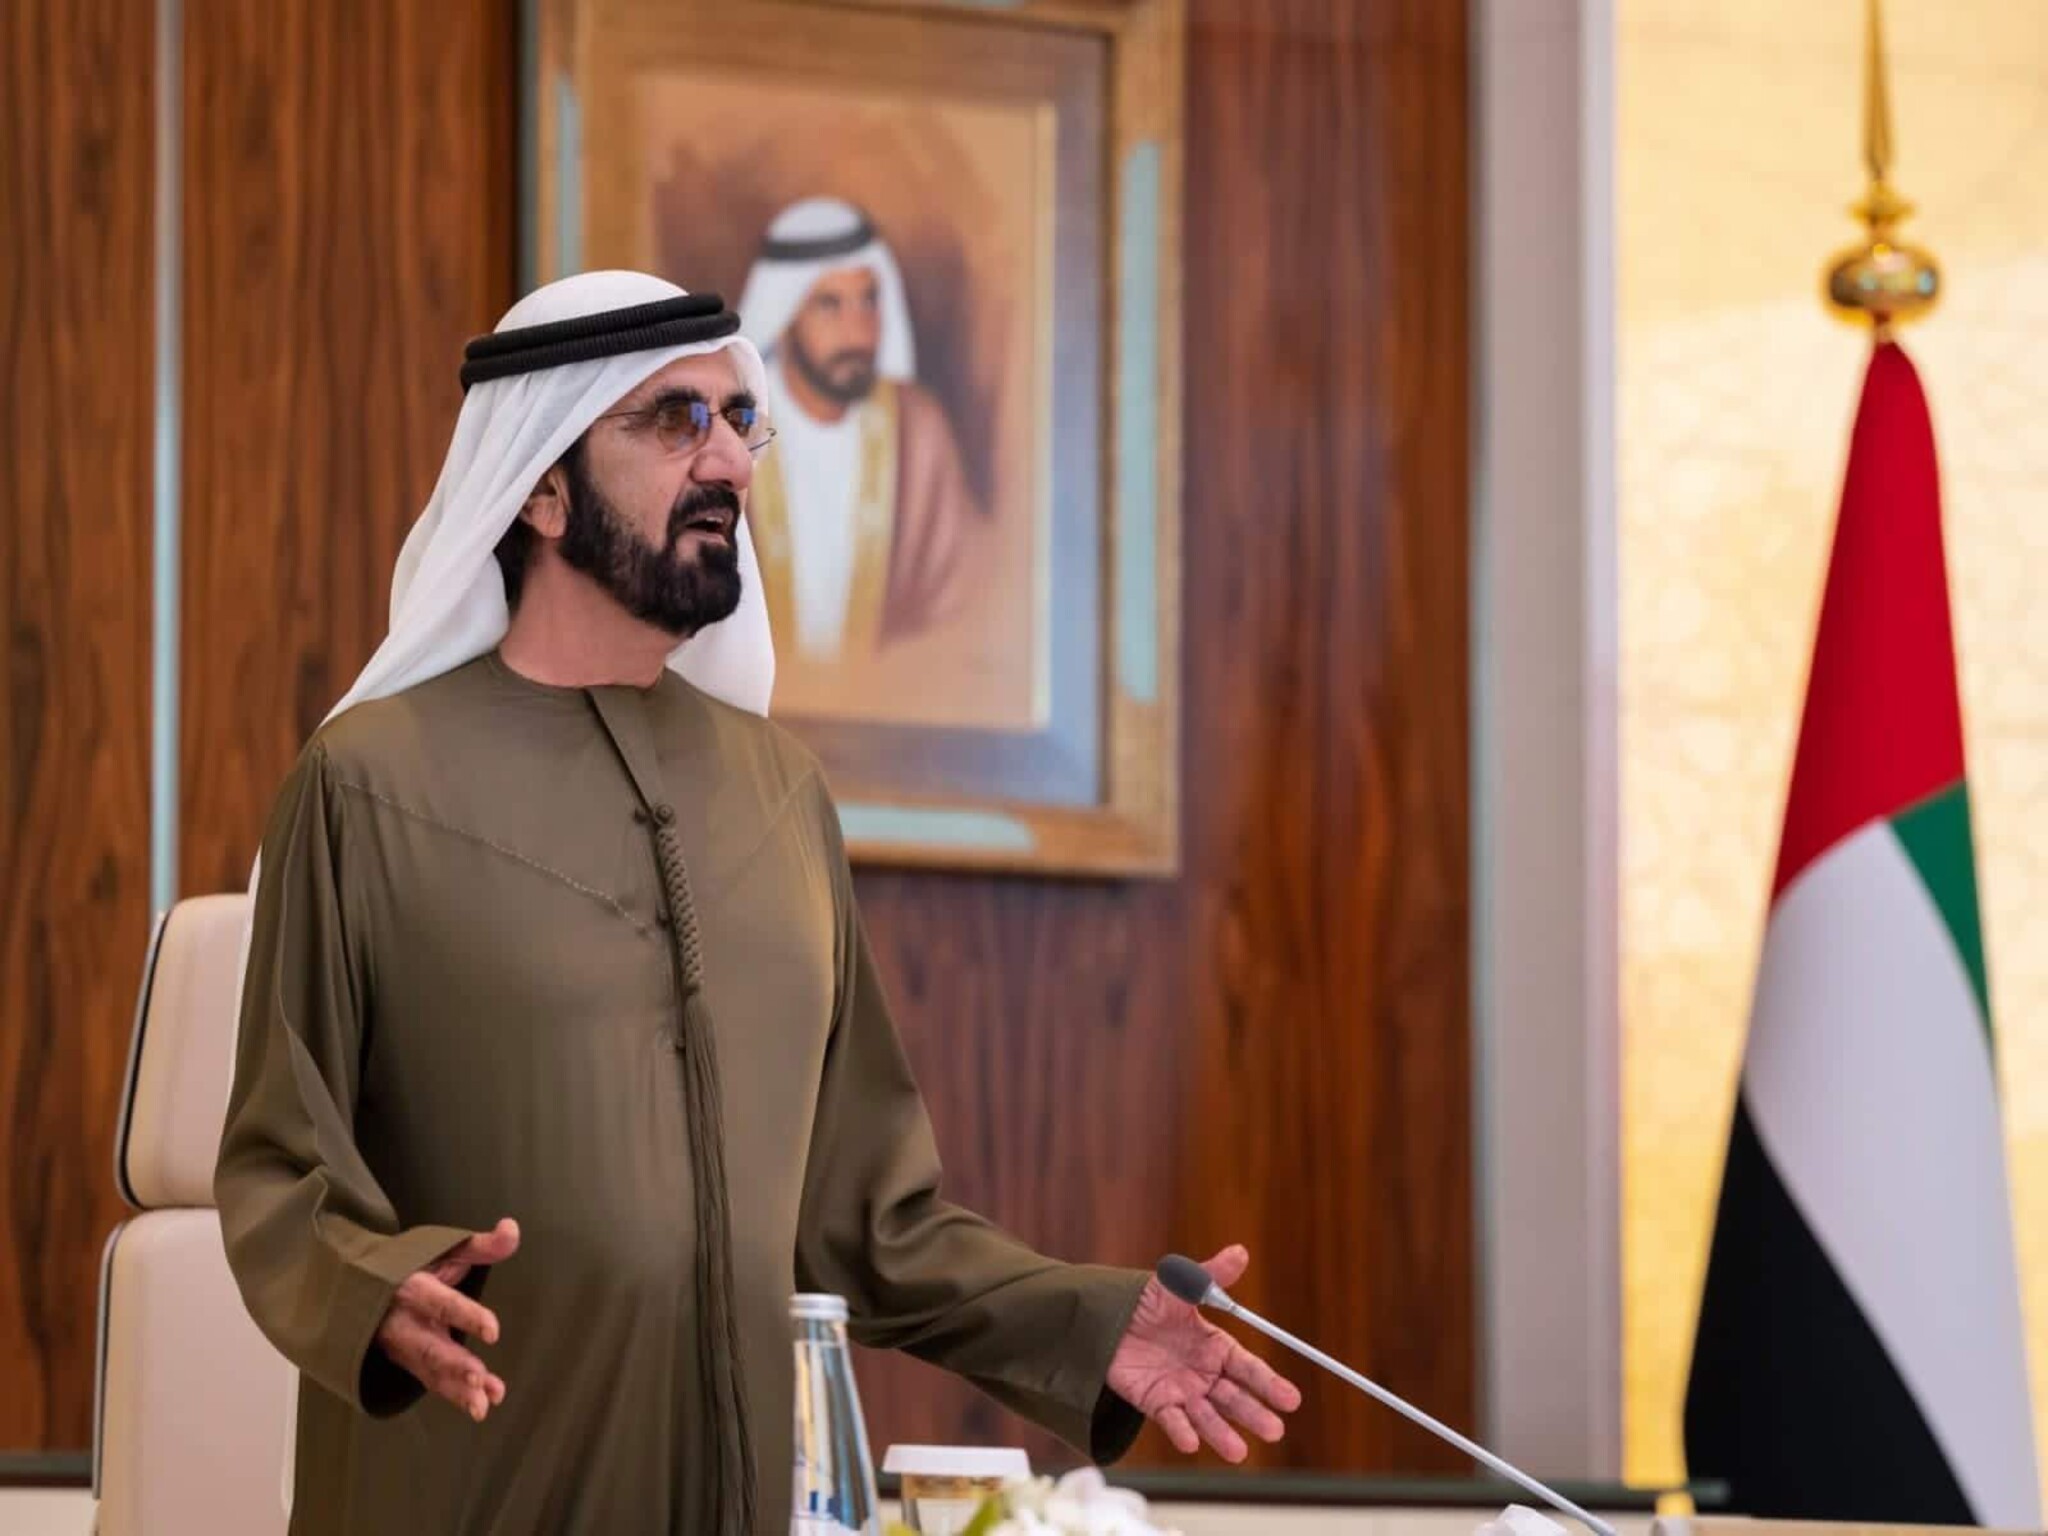 A statement from Sheikh Mohammed bin Rashid regarding work in the private sector